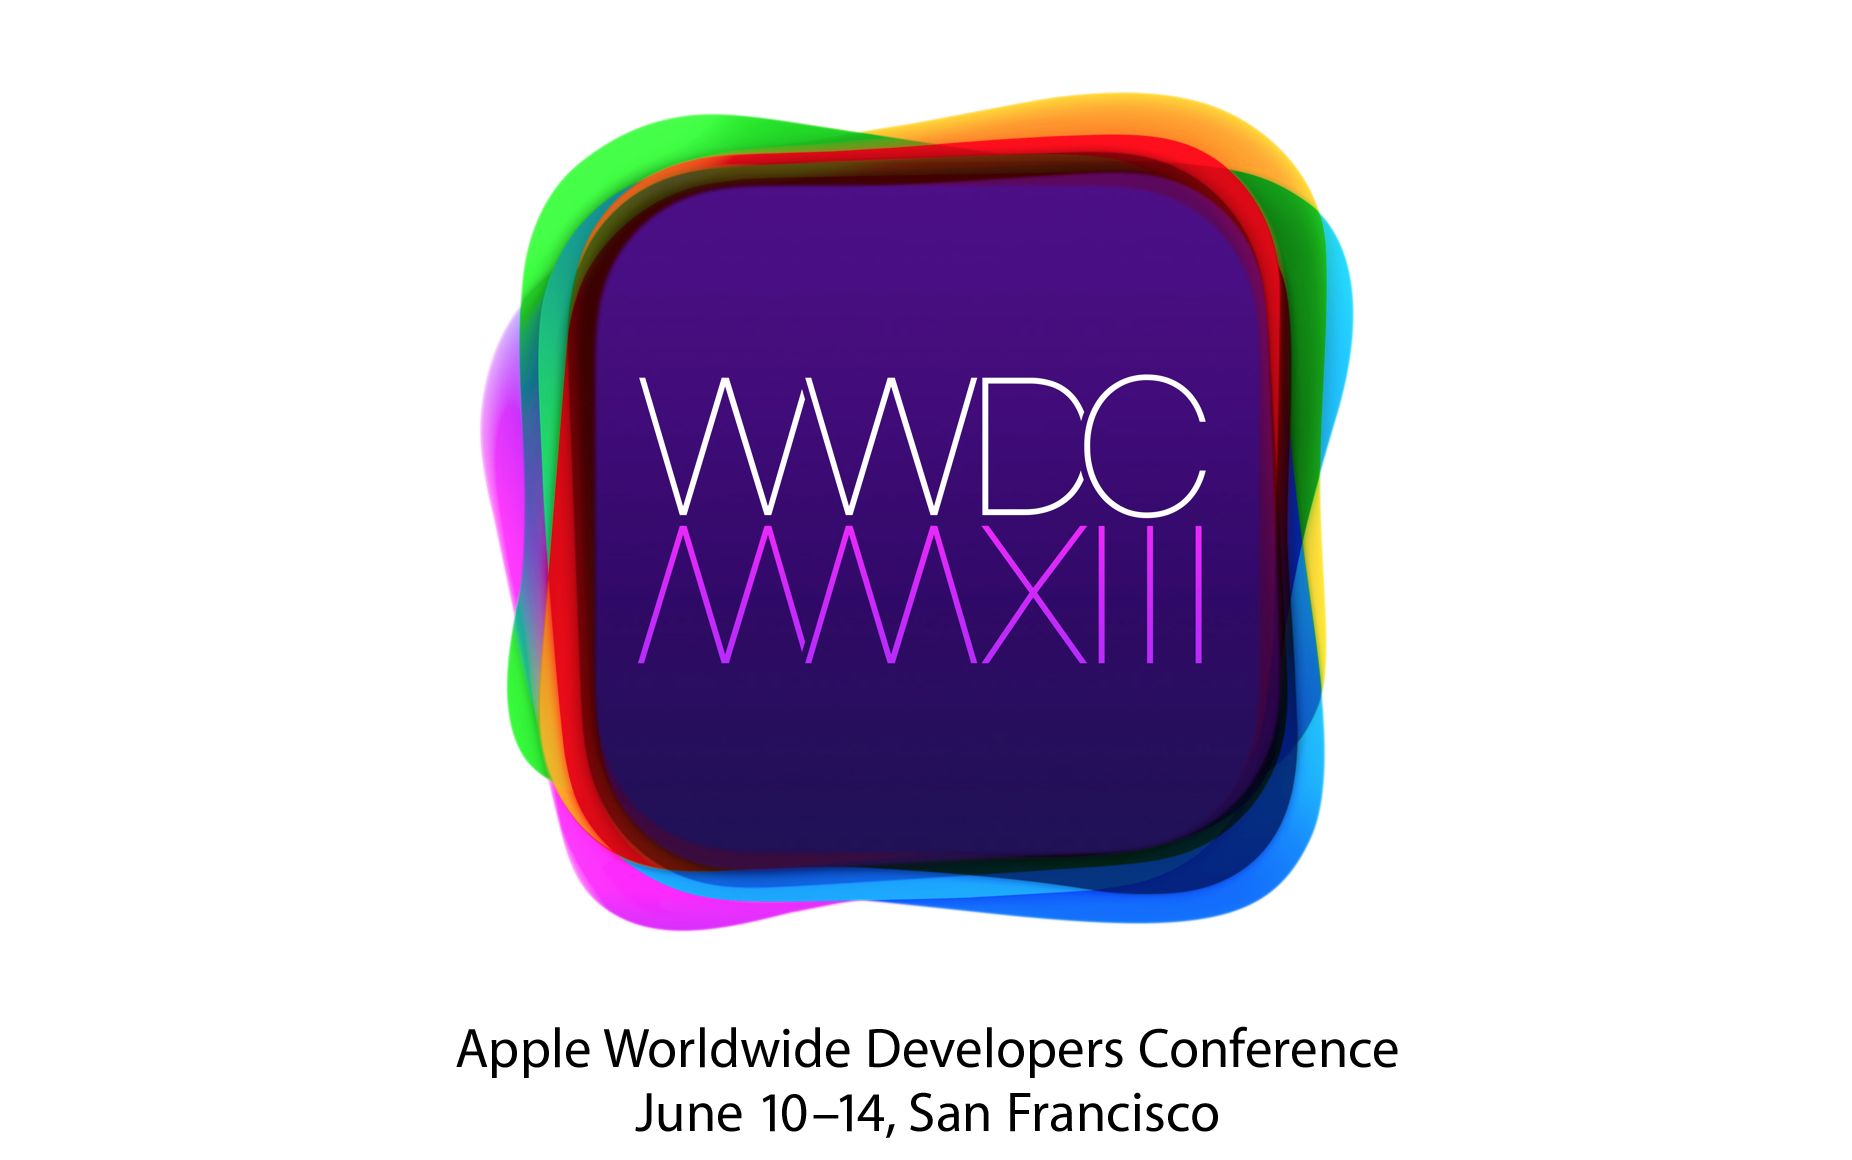 Ad for Apple WWDC 2013